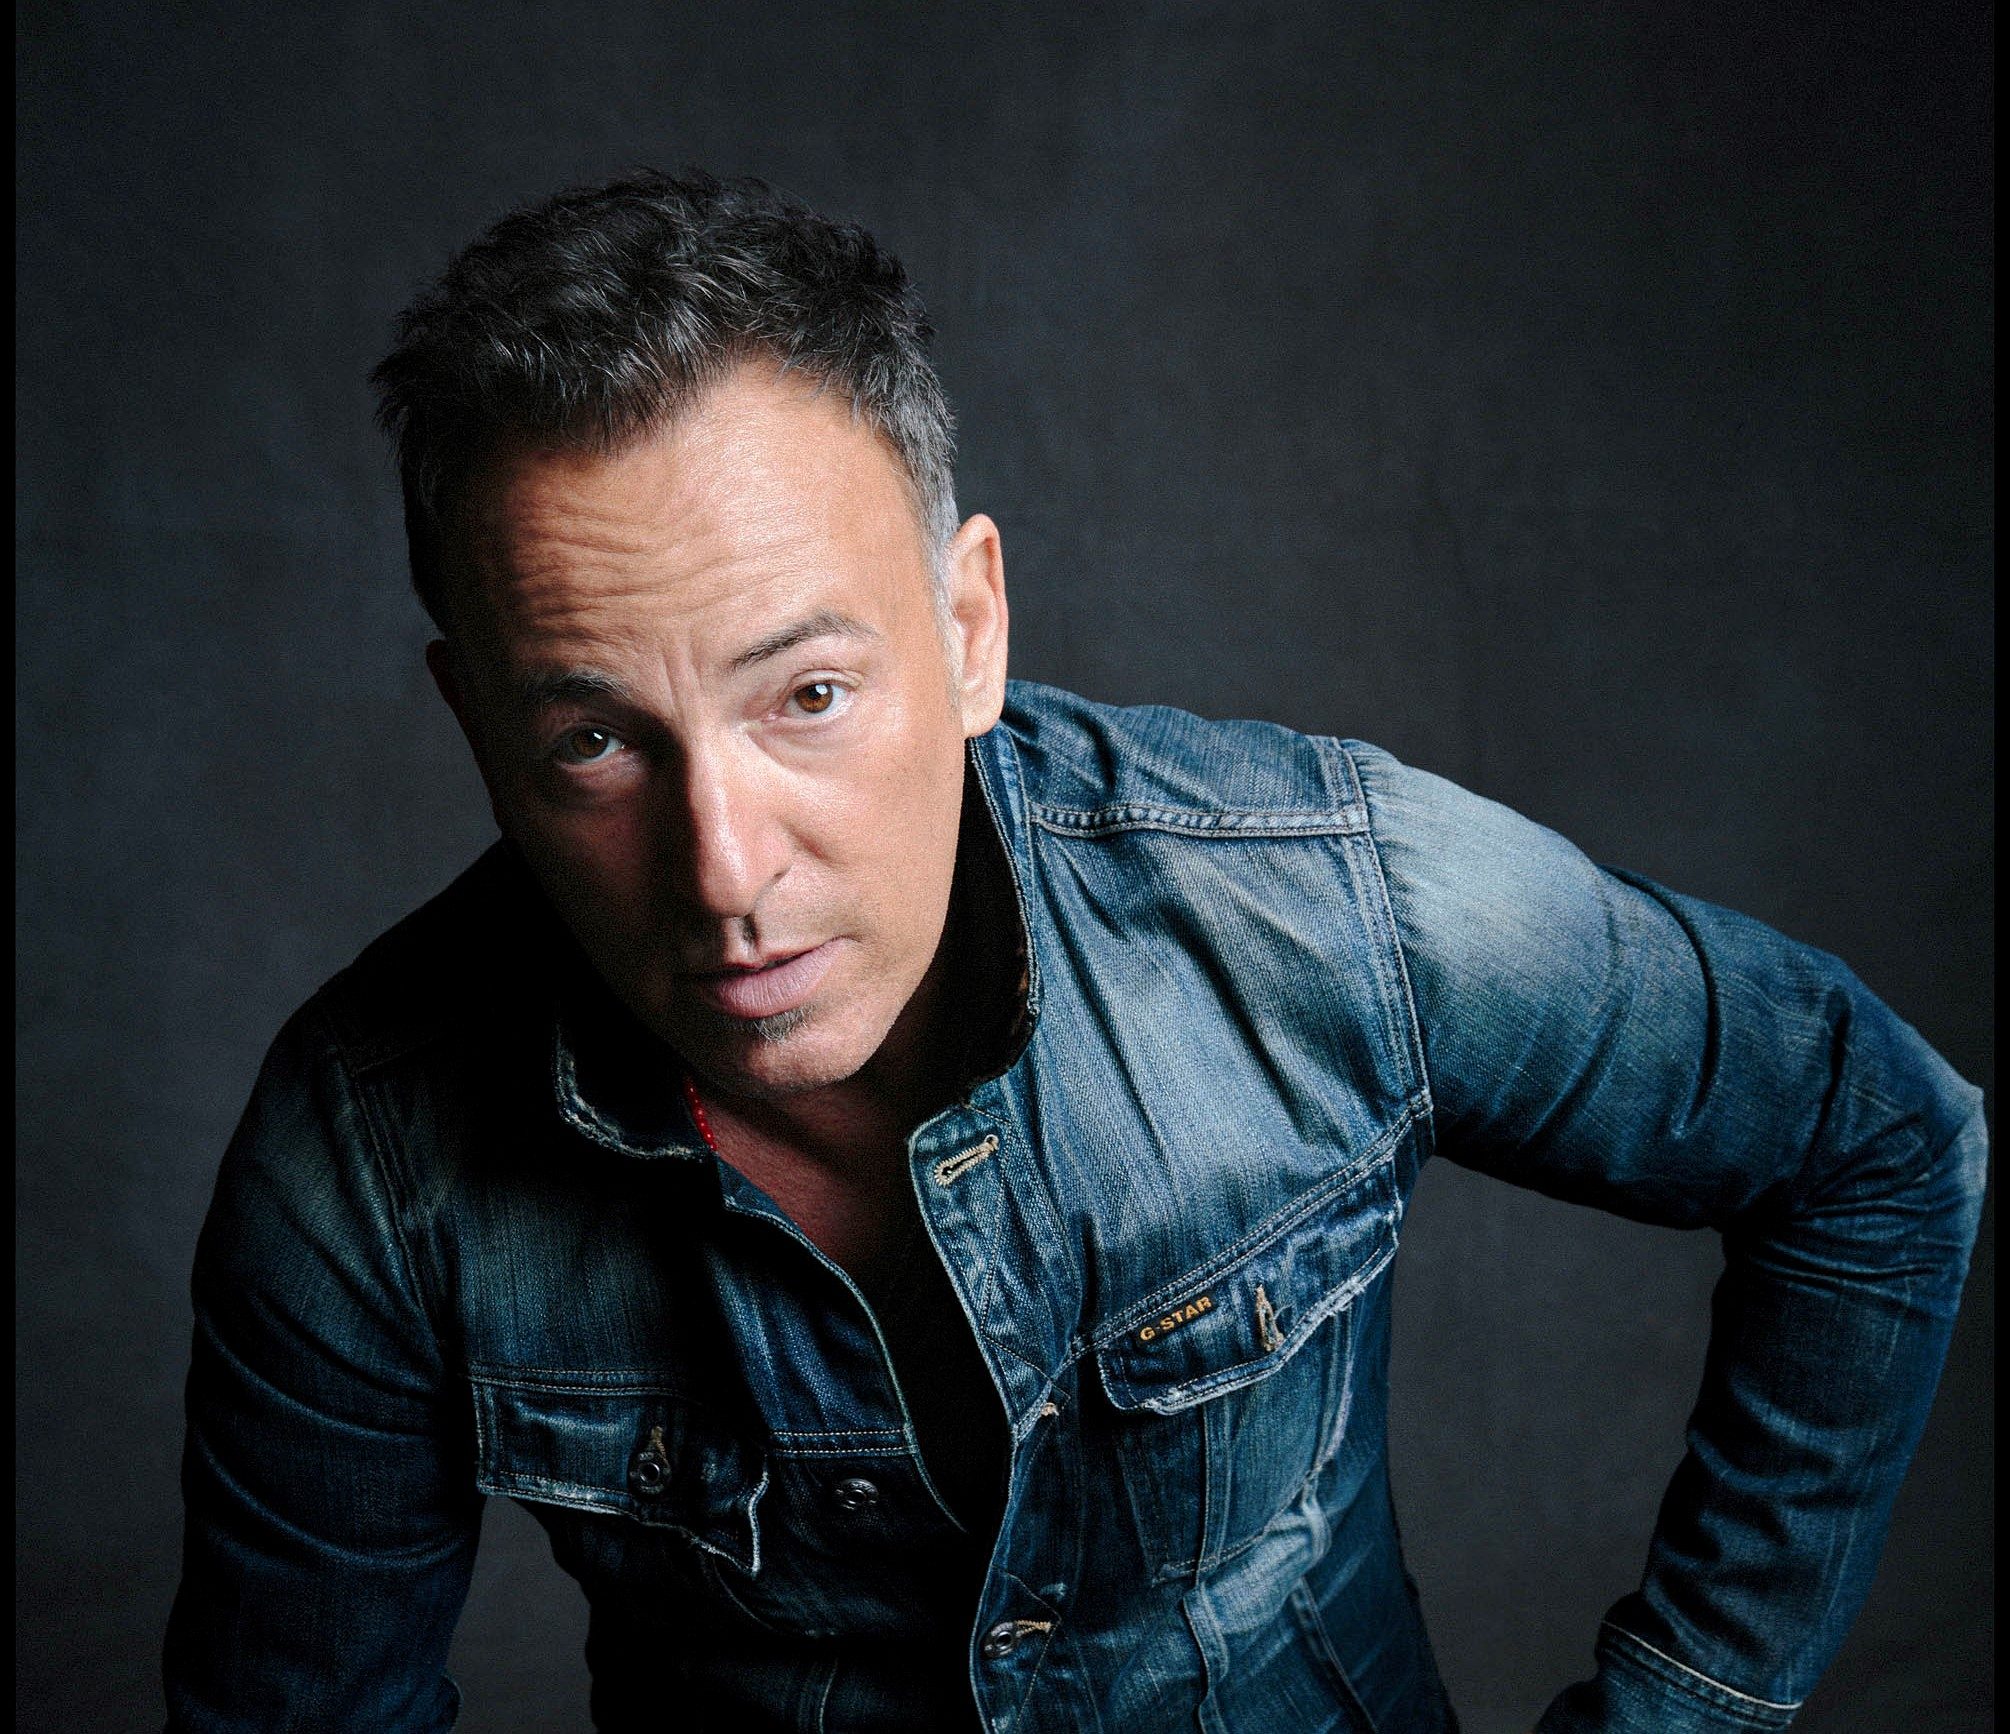 Bruce Springsteen Postpones Remaining 2023 Tour Dates To 2024 Due To Illness